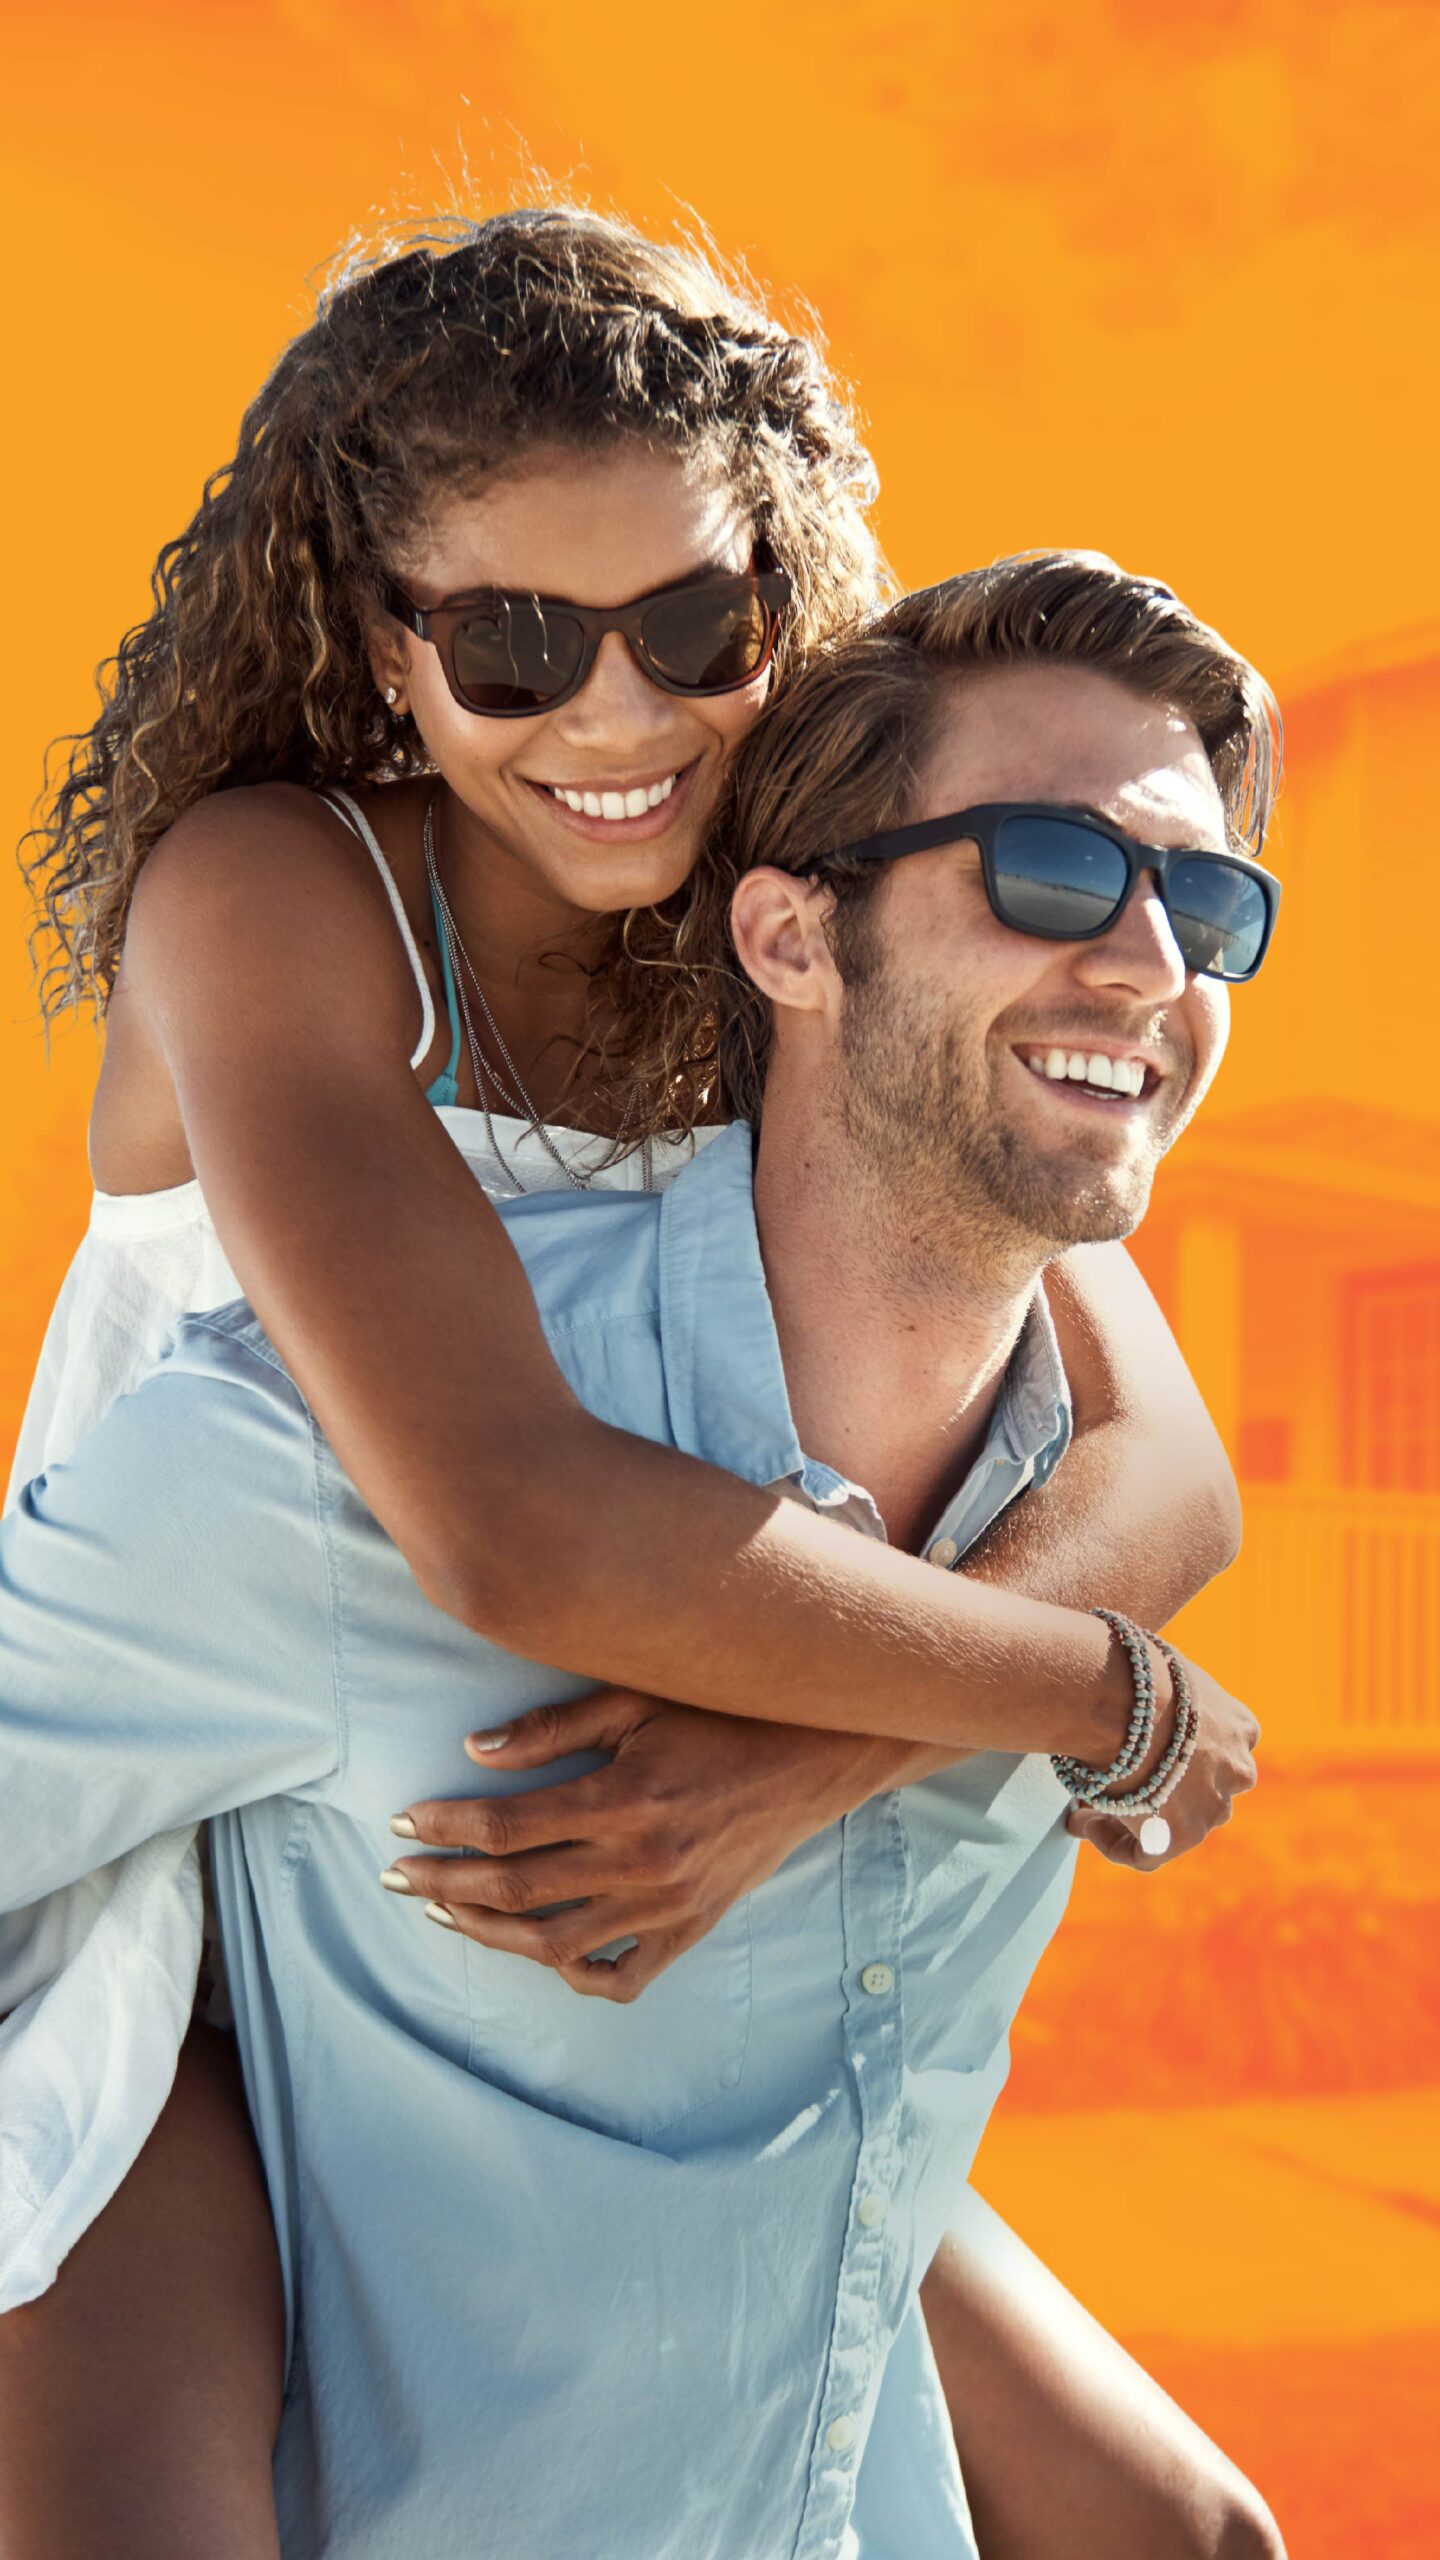 Man and woman with sunglasses on